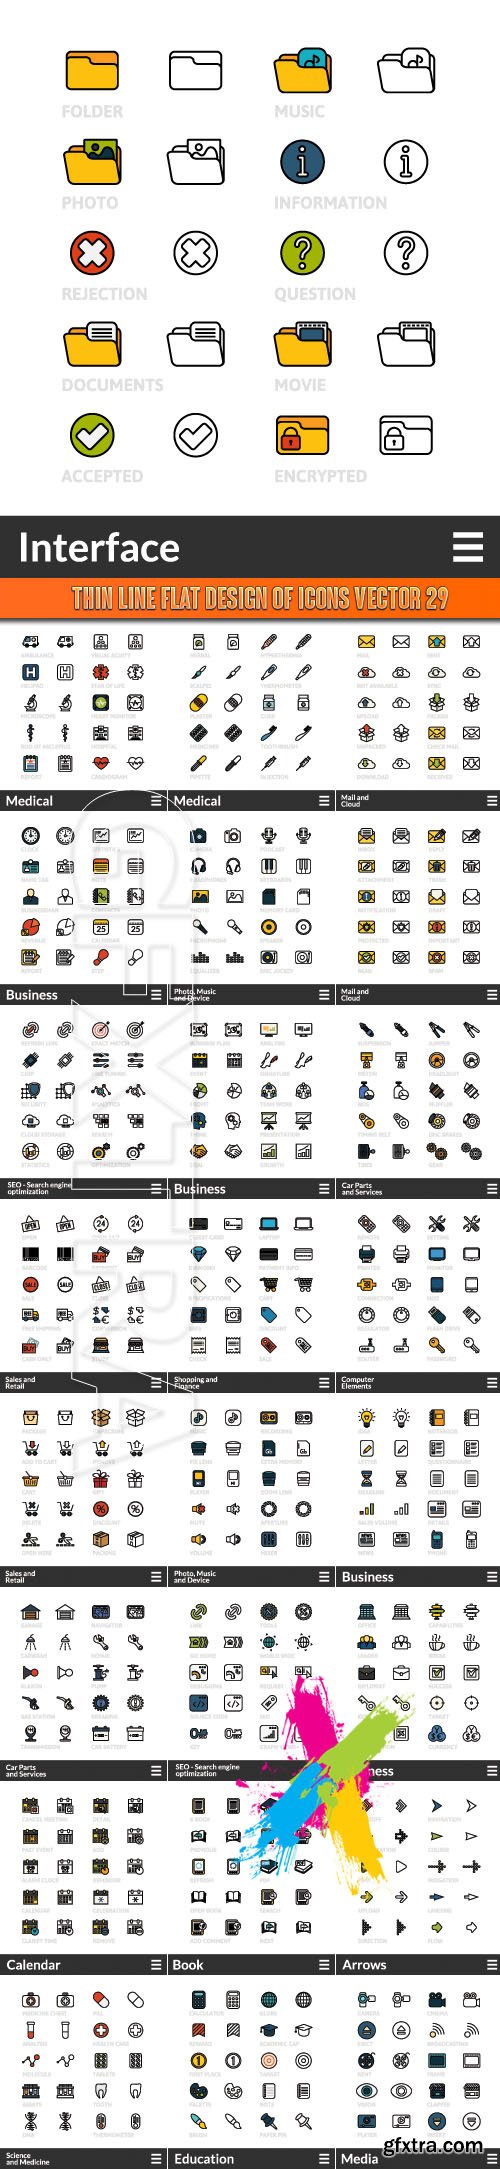 Thin line flat design of icons vector 29